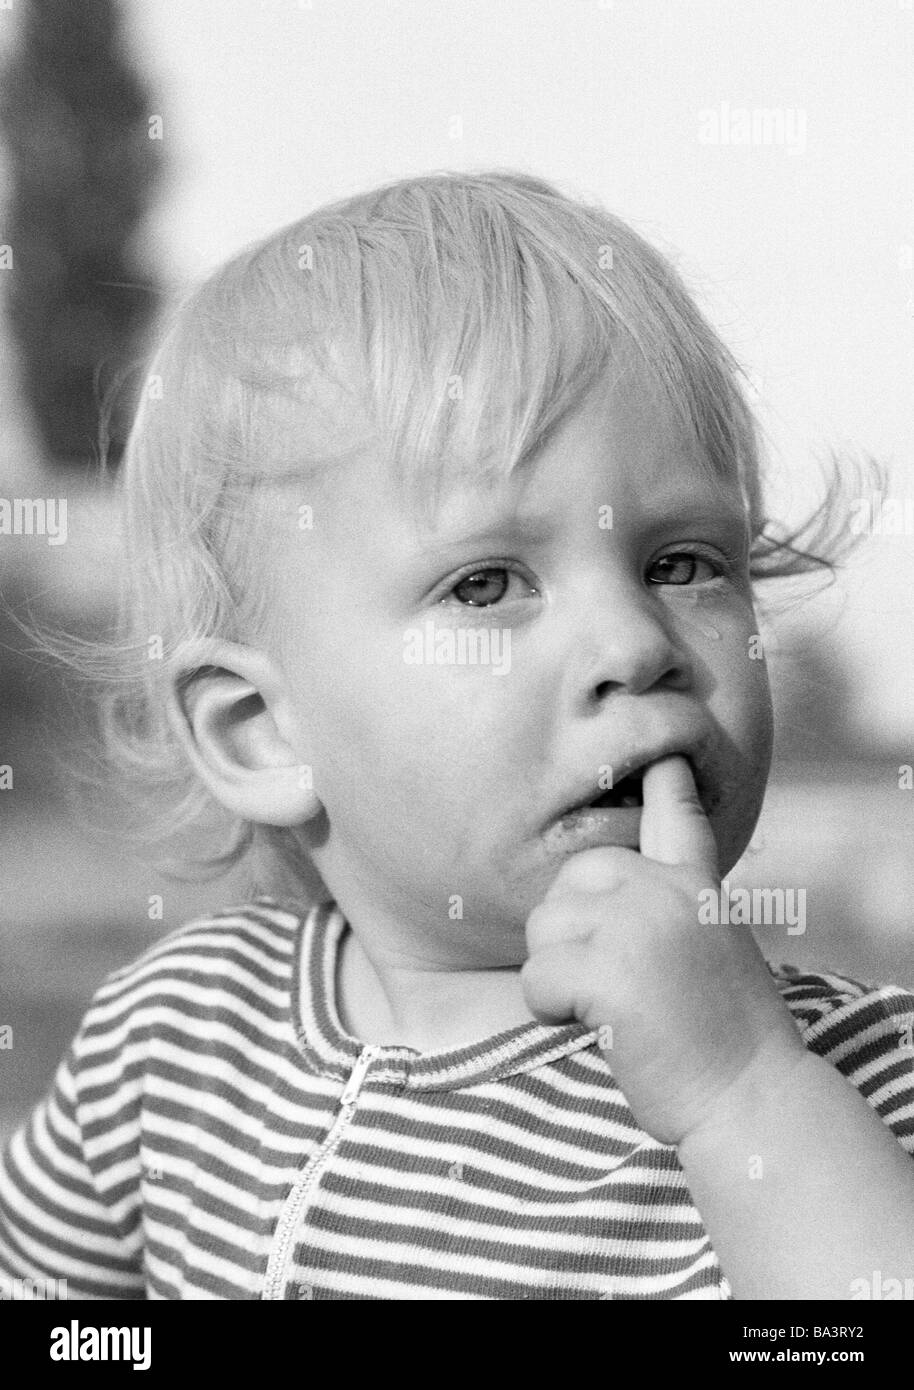 Seventies, black and white photo, people, children, little girl puts her finger in the mouth, shyness, crying, portrait, aged 1 to 2 years, Judith Stock Photo